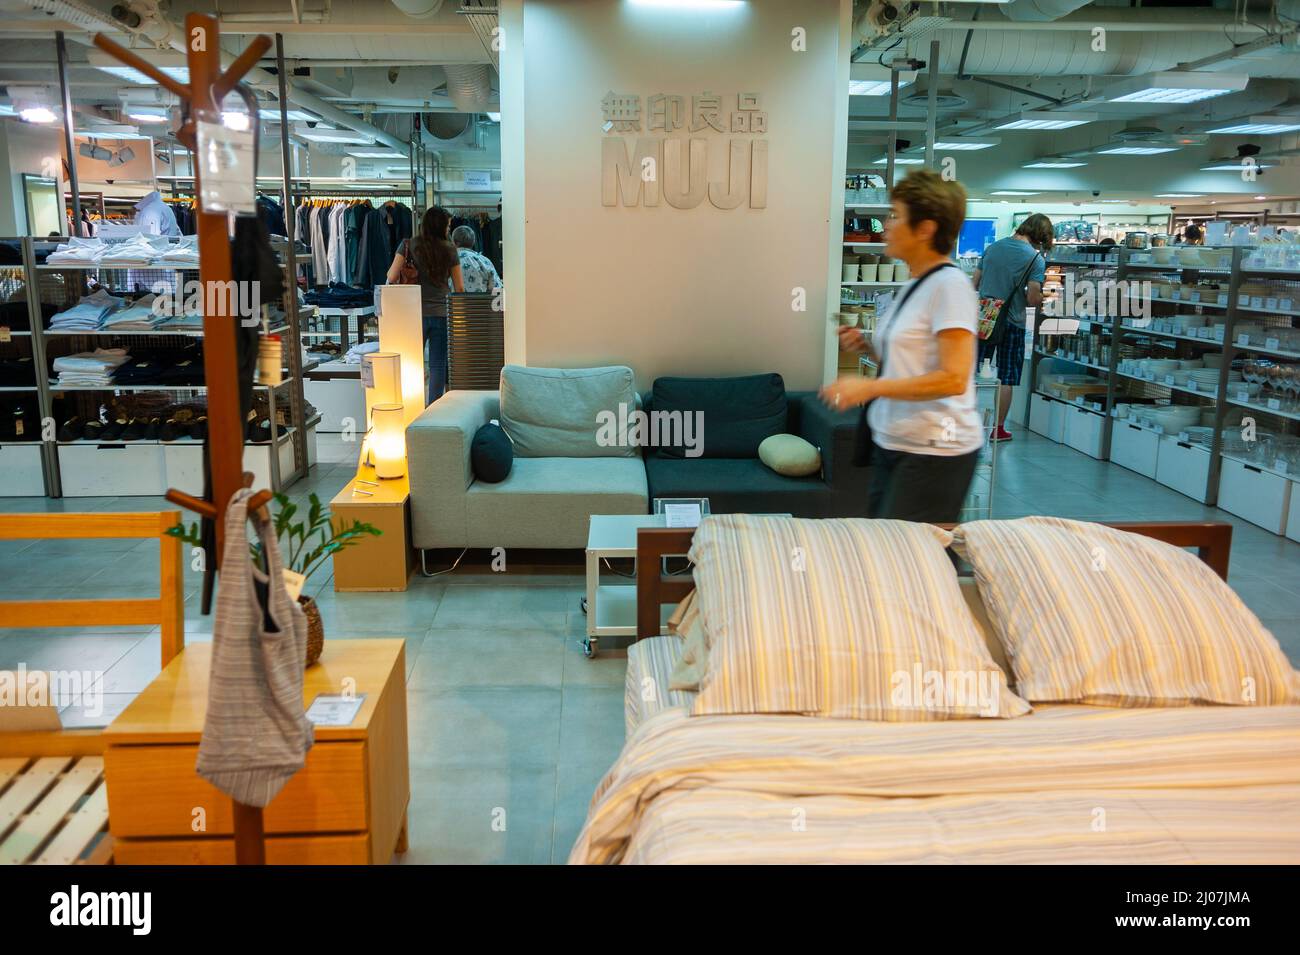 Paris, France, People Shopping inside Household Items, Furniture Store Muji, Les Halles Forum, Stock Photo